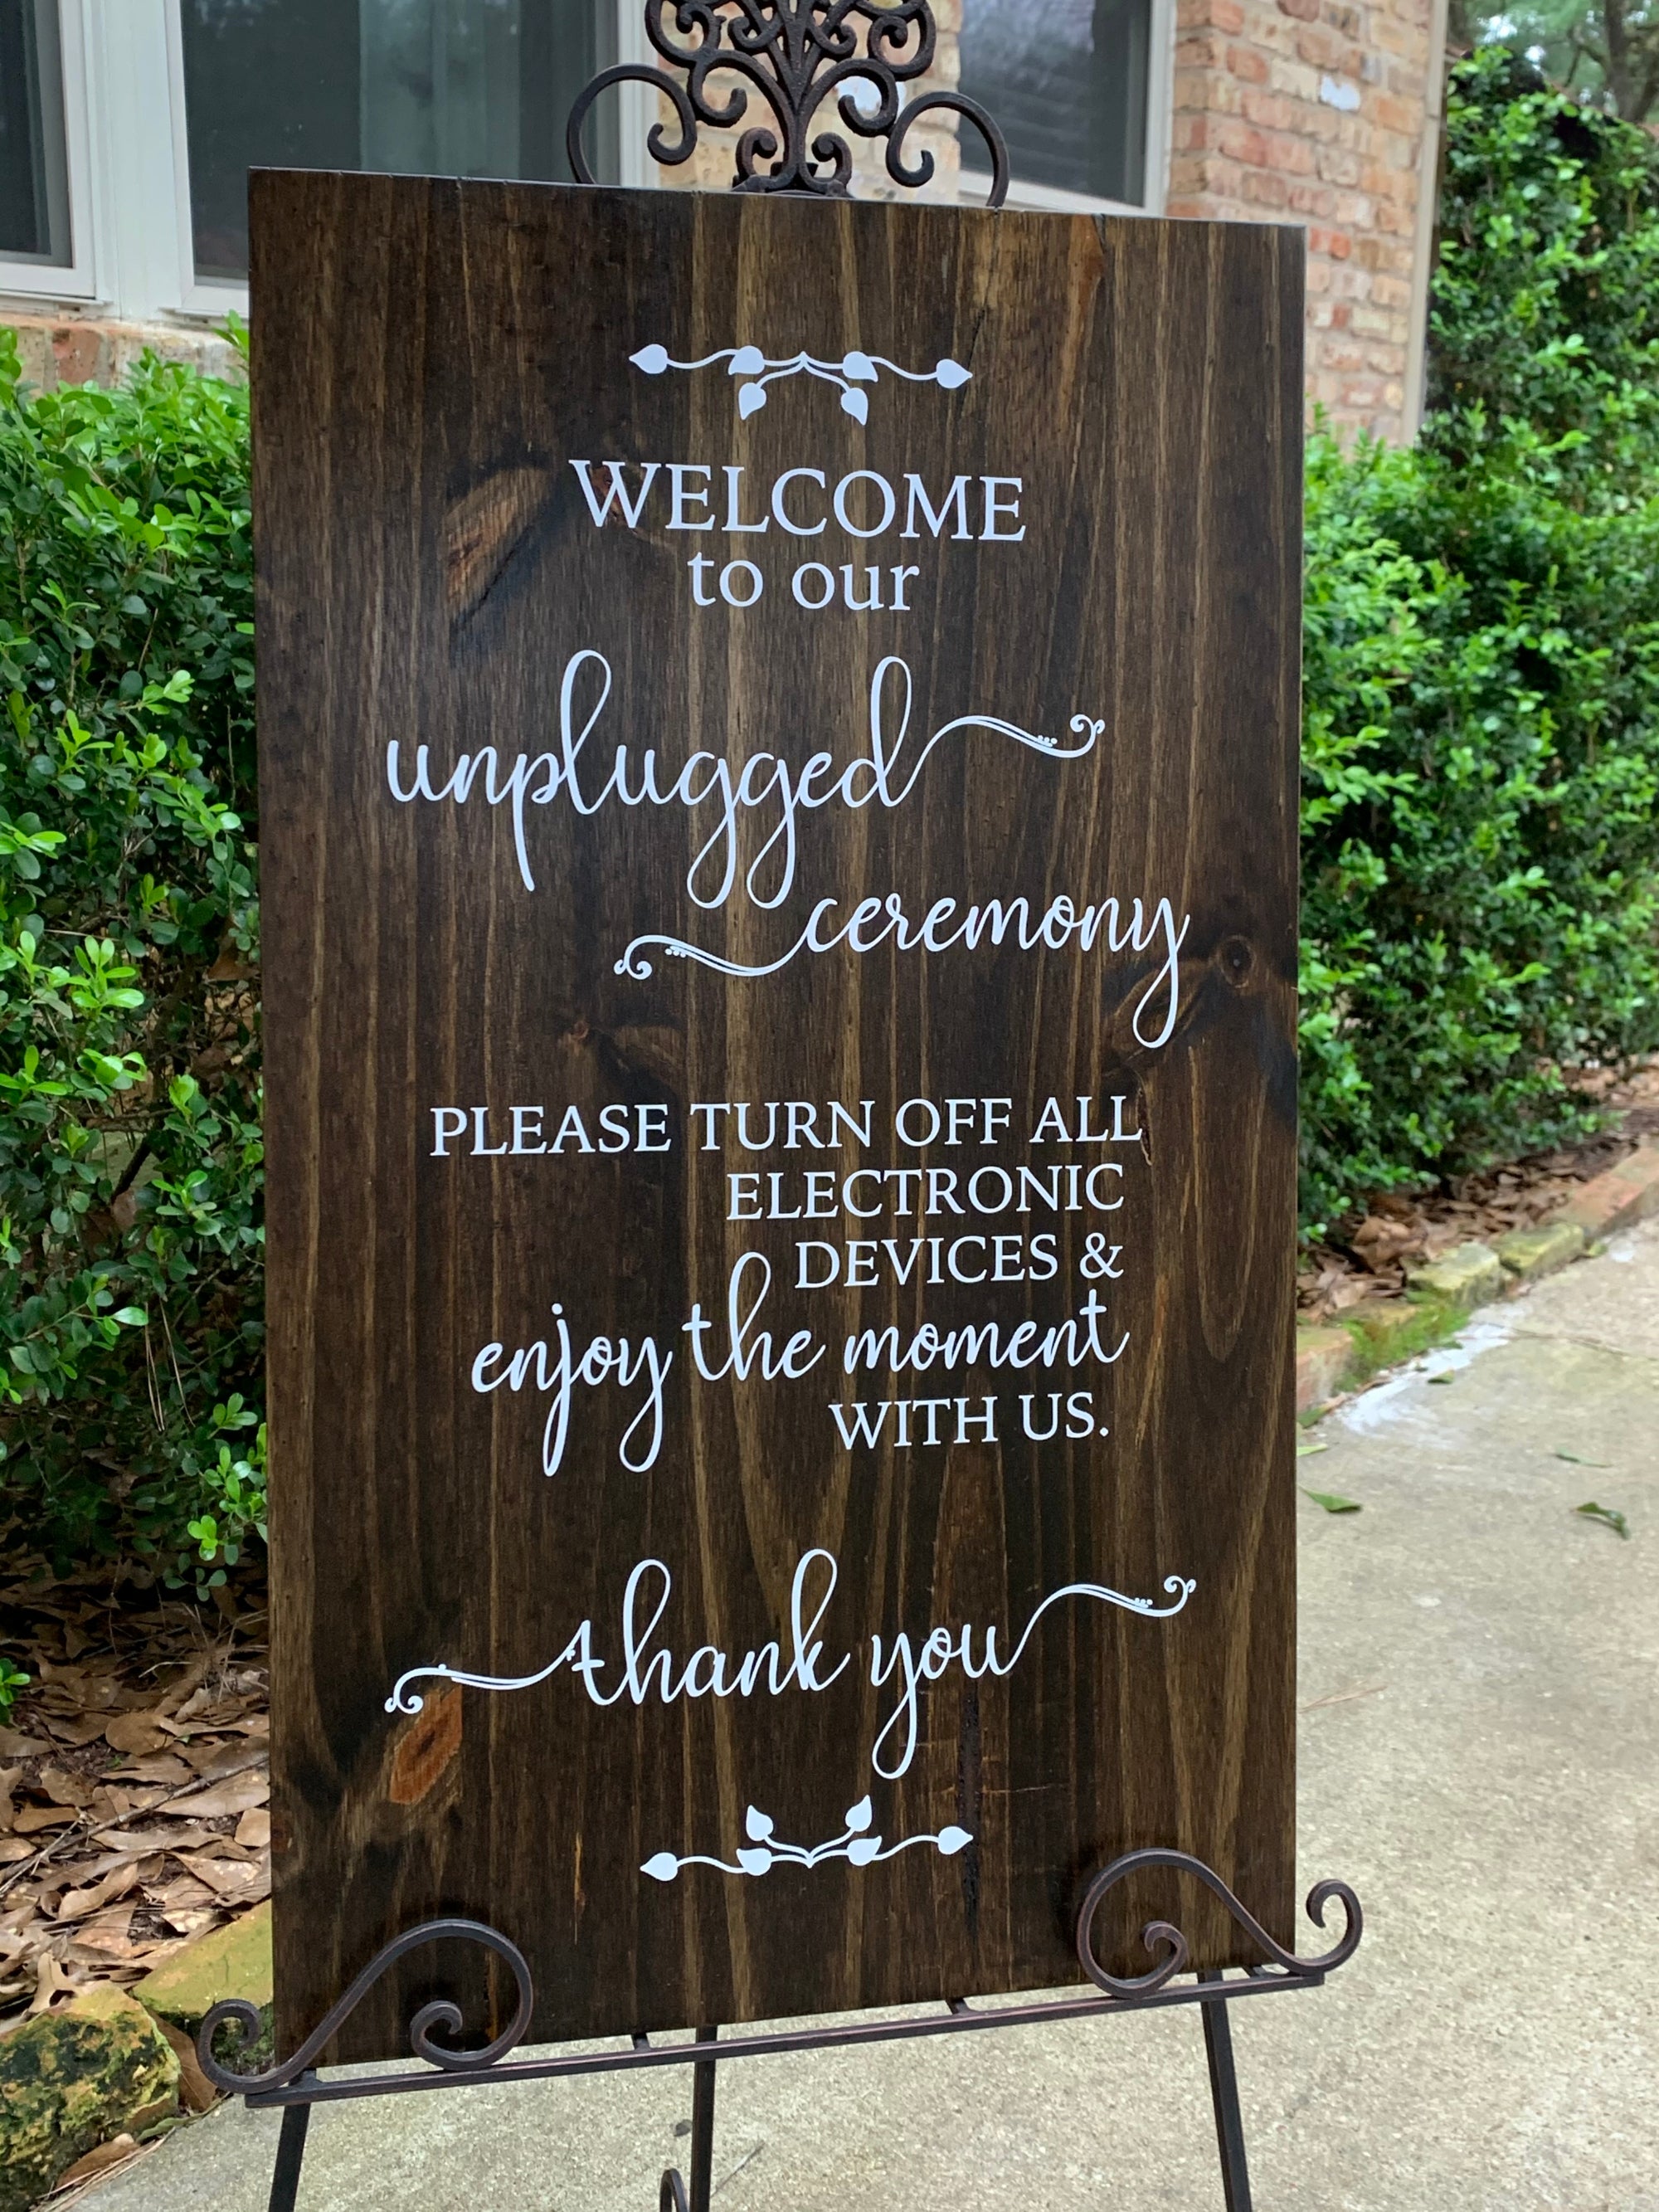 Unplugged Ceremony Signs, Welcome Wedding Sign, Wooden Rustic Decor, Vertical Prop Photo, Unplugged Wedding, Romantic Signs